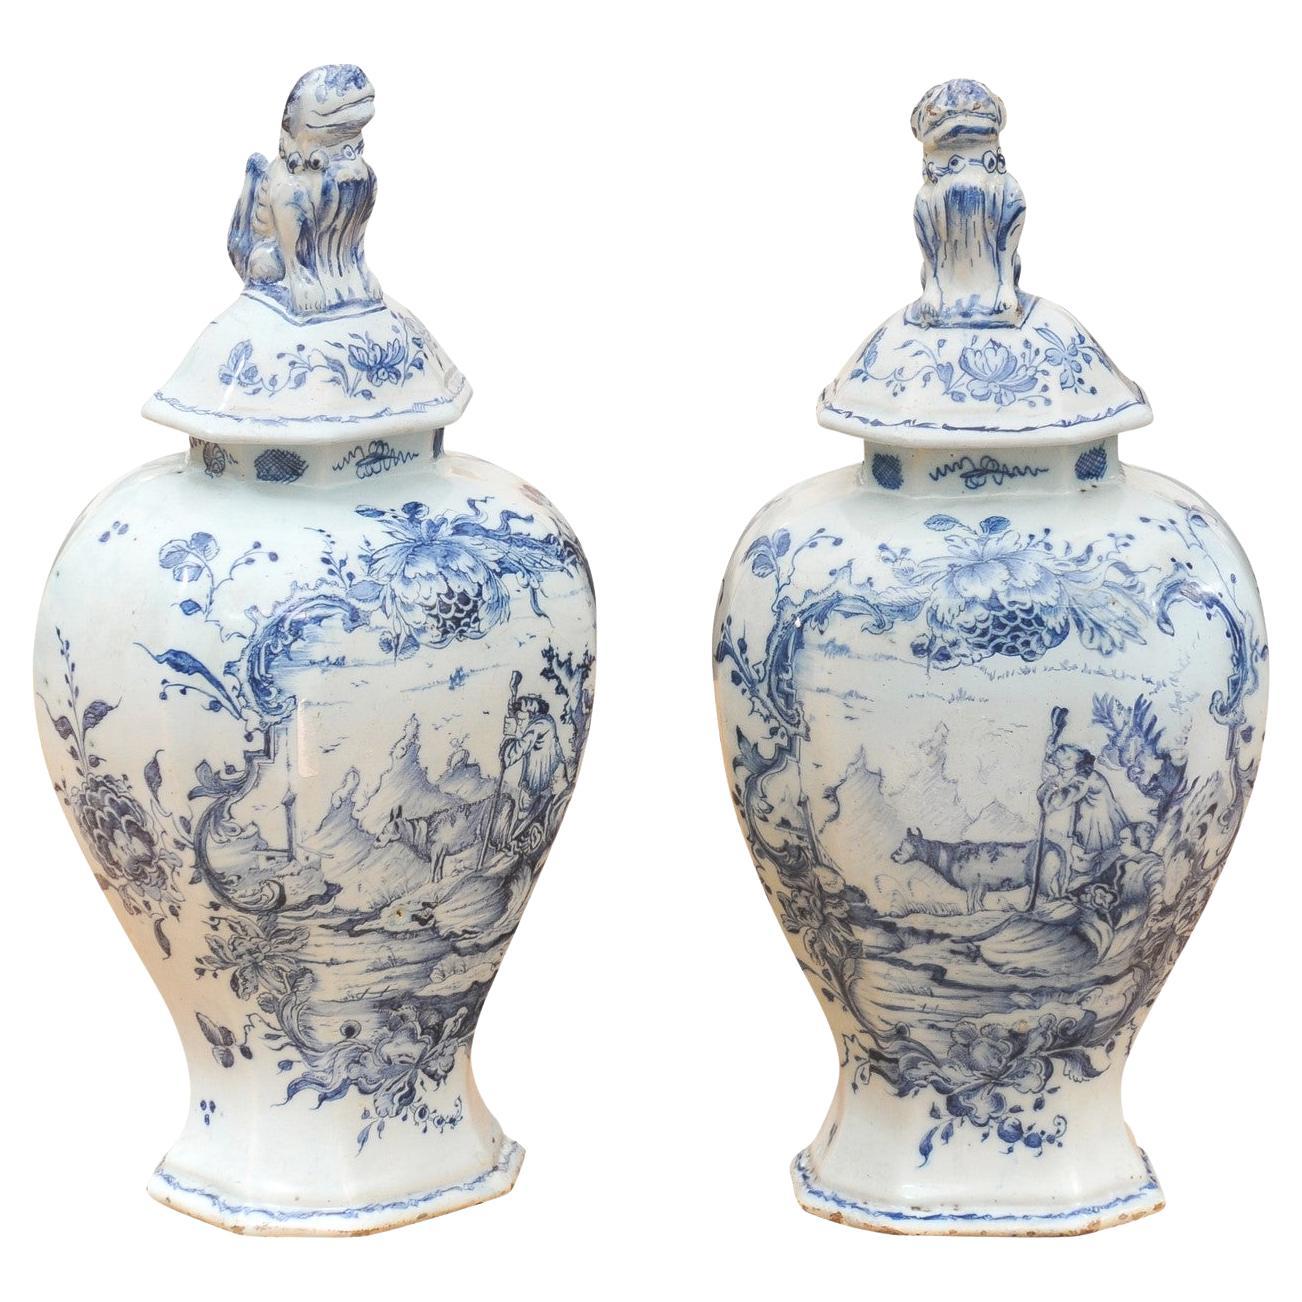 Pair of Late 18th Century Italian Porcelain Garniture Urns with Lids